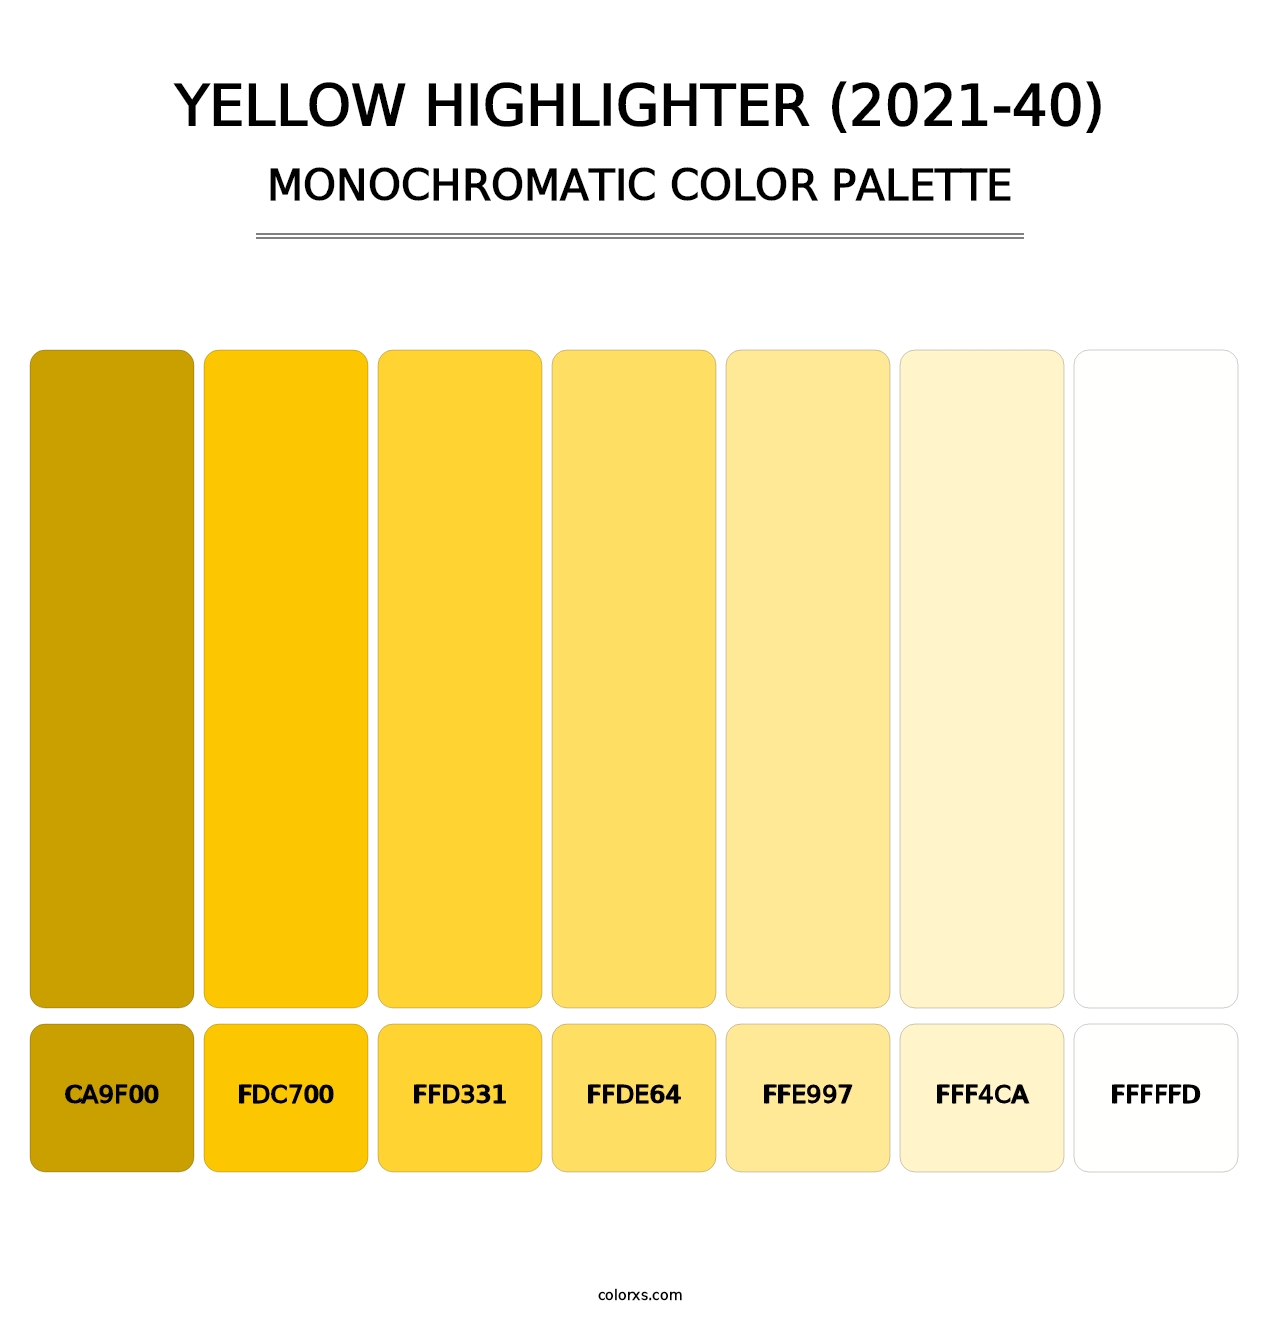 Yellow Highlighter (2021-40) - Monochromatic Color Palette